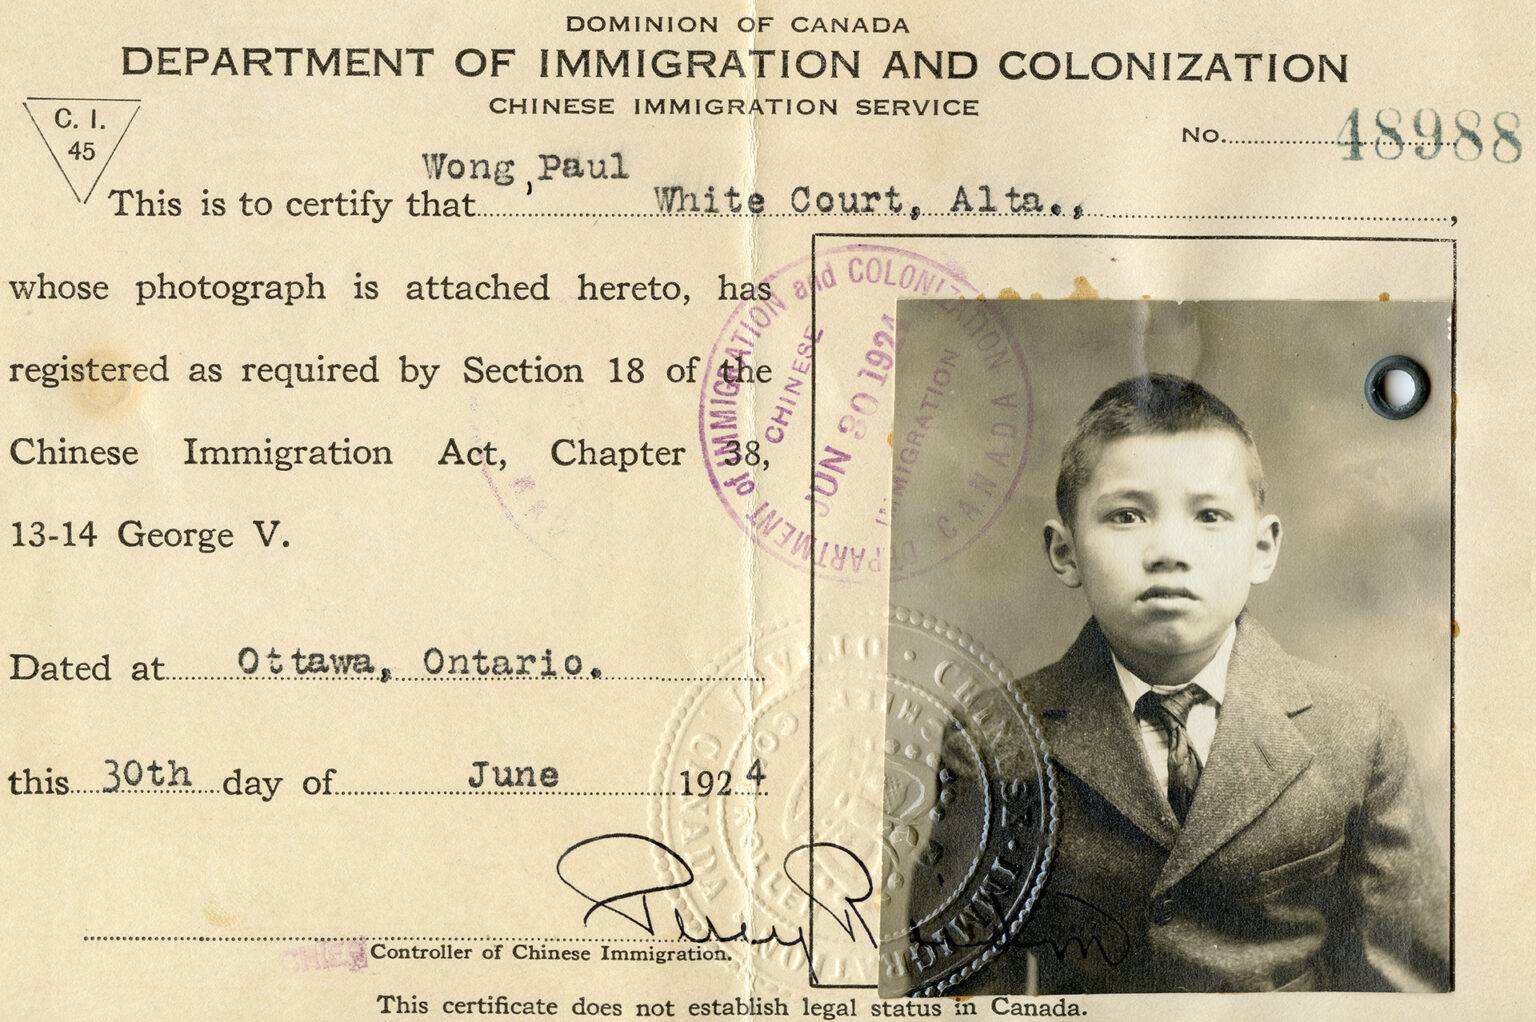 C.I.45 1924 WONG Paul. White Court, Alta. Paul was the first child from his family to be born on Canadian soil. His mother arrived in Canada on Sept 27, 1912 heavily pregnant with him. Two weeks later, on October 11, Paul was born. Growing up, he moved around with his family — BC, Alberta and Saskatchewan — where his father (Wong Wing Yun) worked and owned small town cafes, grocery stores and laundromats. His father had arrived in Canada in the 1880s to work on the railroad. The Great Depression of the 1930s left the family hungry and desperate at times. Legend has it, that Paul’s mother (Poon Lin Tsing) caught a skunk and fed it to the family for supper. In 1947, Canadian citizens of Chinese descent get the right to vote. Paul never missed his chance to vote in every election after until he died in 2004.